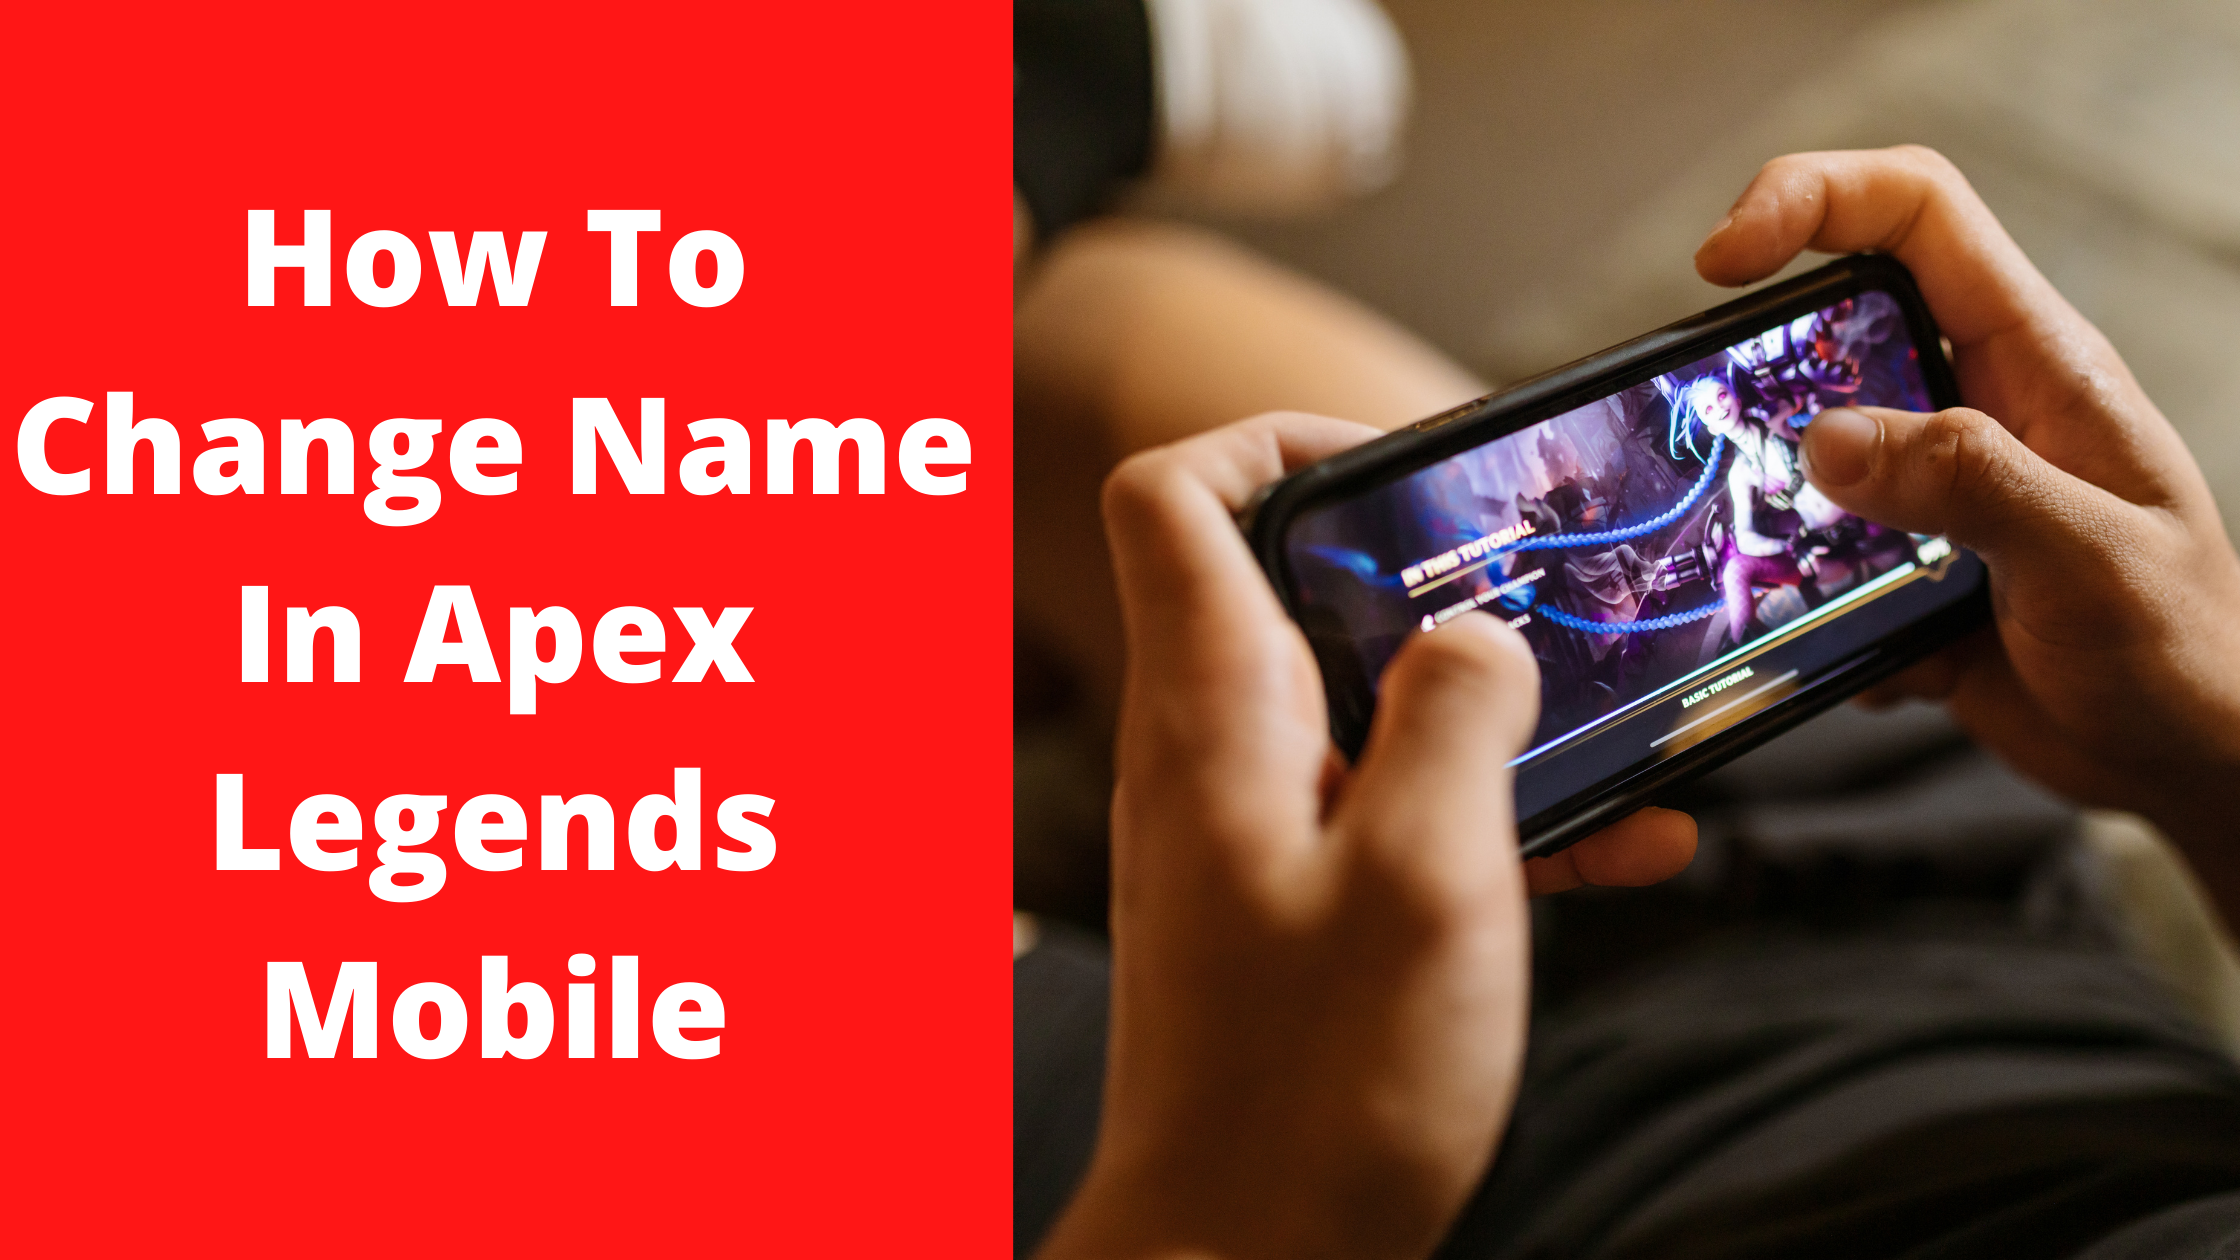 How To Change Name In Apex Legends Mobile